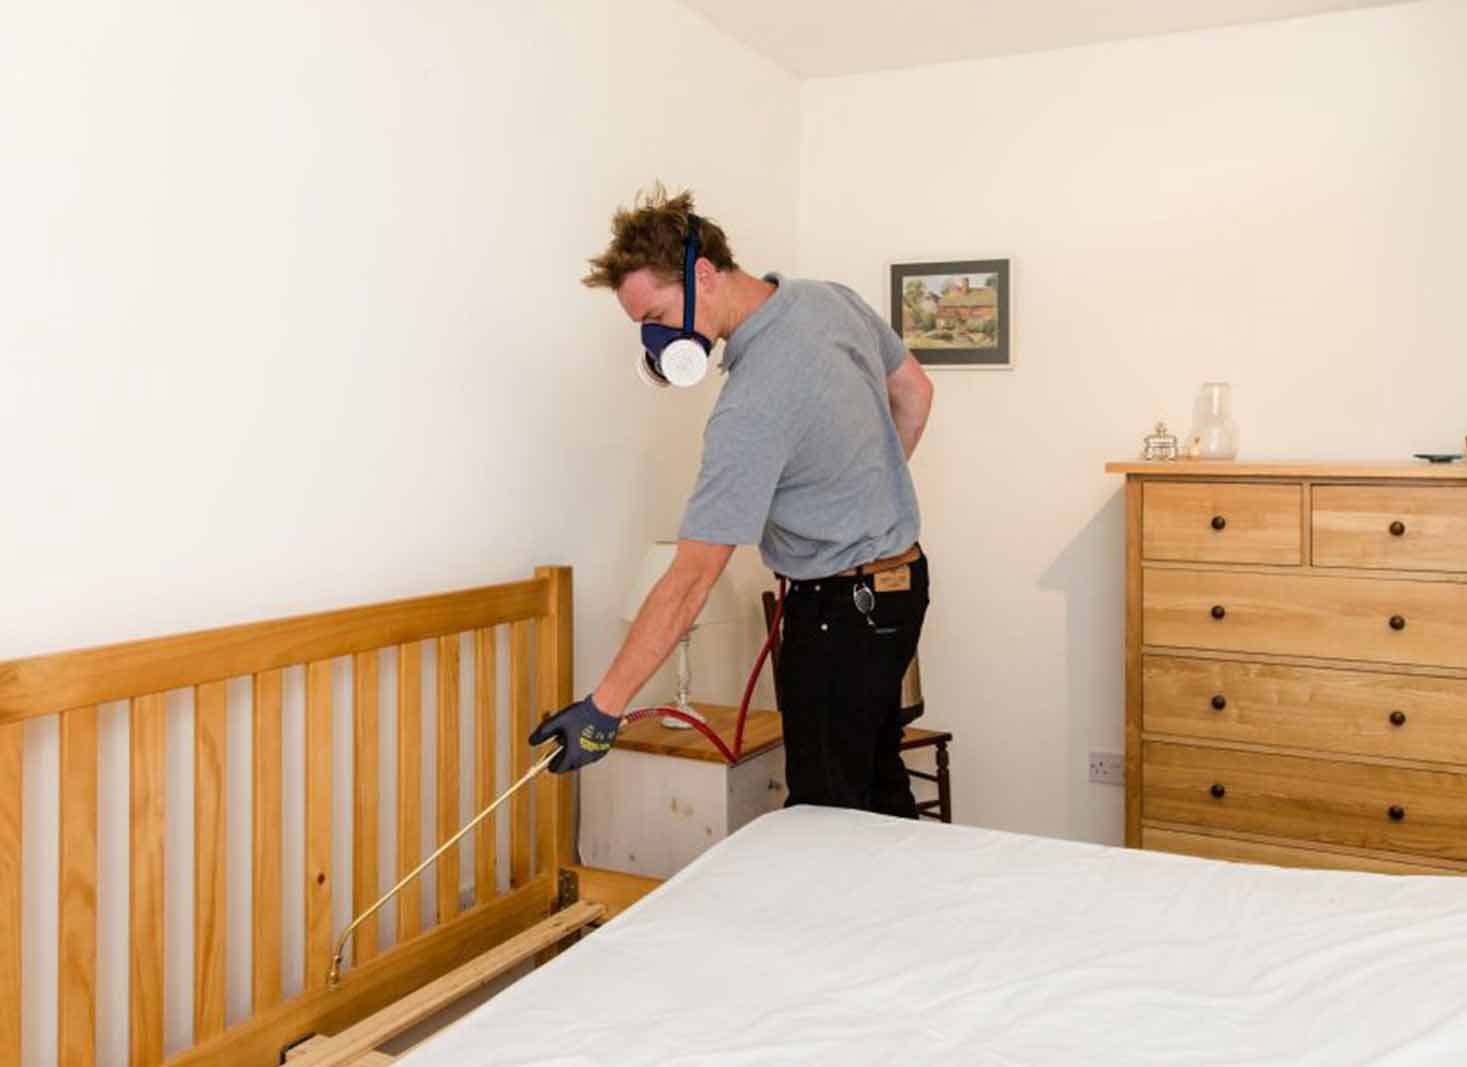 Responsible for bed bug treatment in a rental property in NY